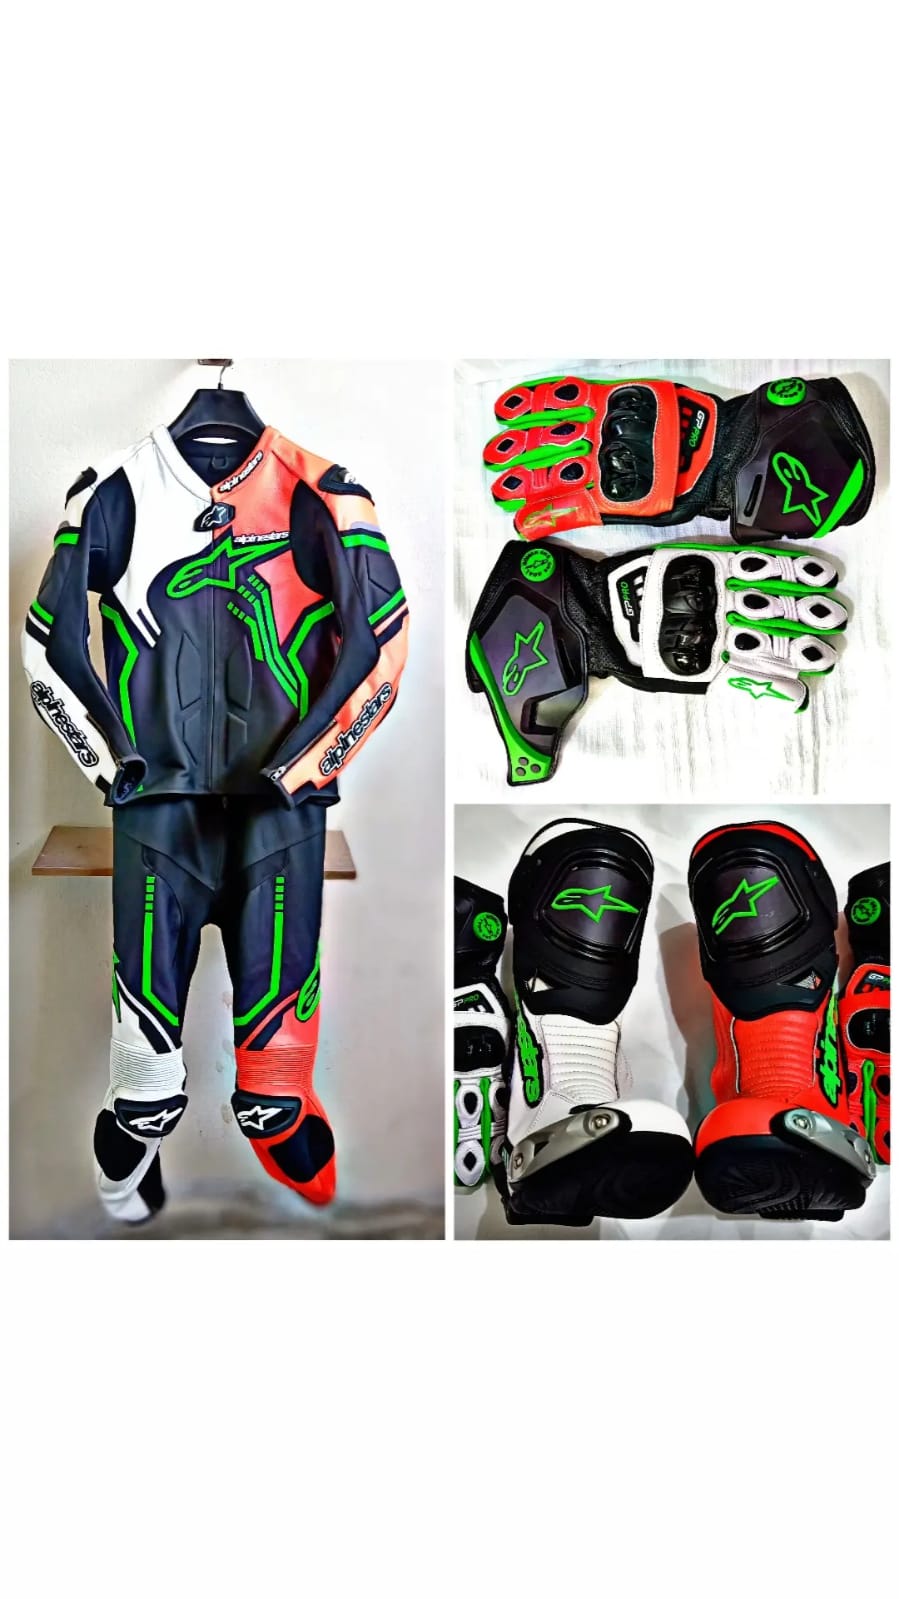 White Fluorescent Orange UG-0130 Custom Design 2 Piece Motorcycle Leather Racing Suit / Gloves / Boots